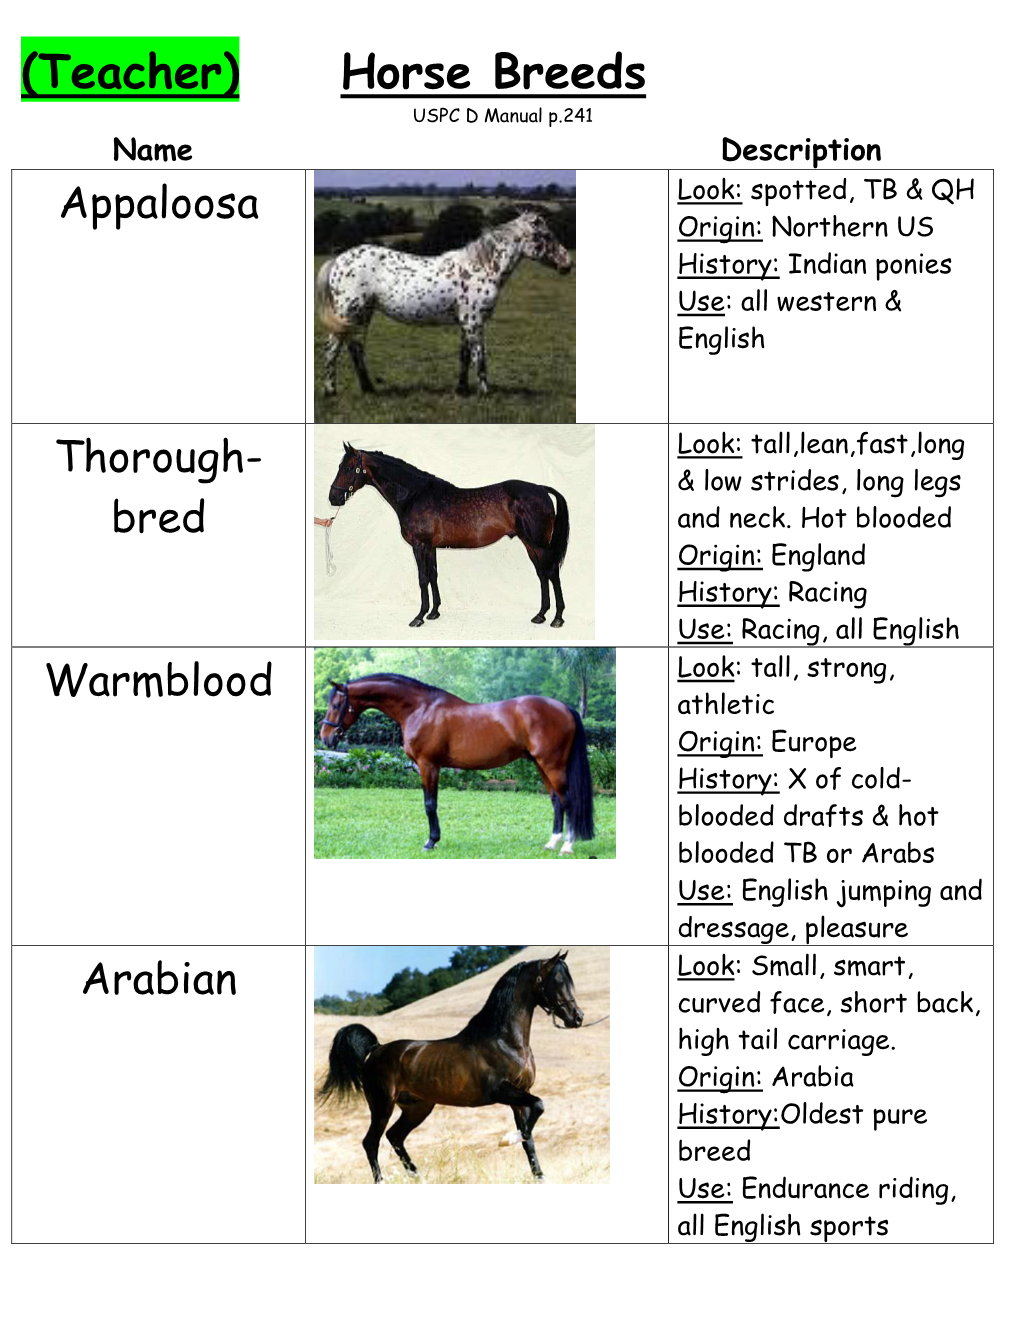 Horse Breeds USPC D Manual P.241 Name Description Look: Spotted, TB & QH Appaloosa Origin: Northern US History: Indian Ponies Use: All Western & English